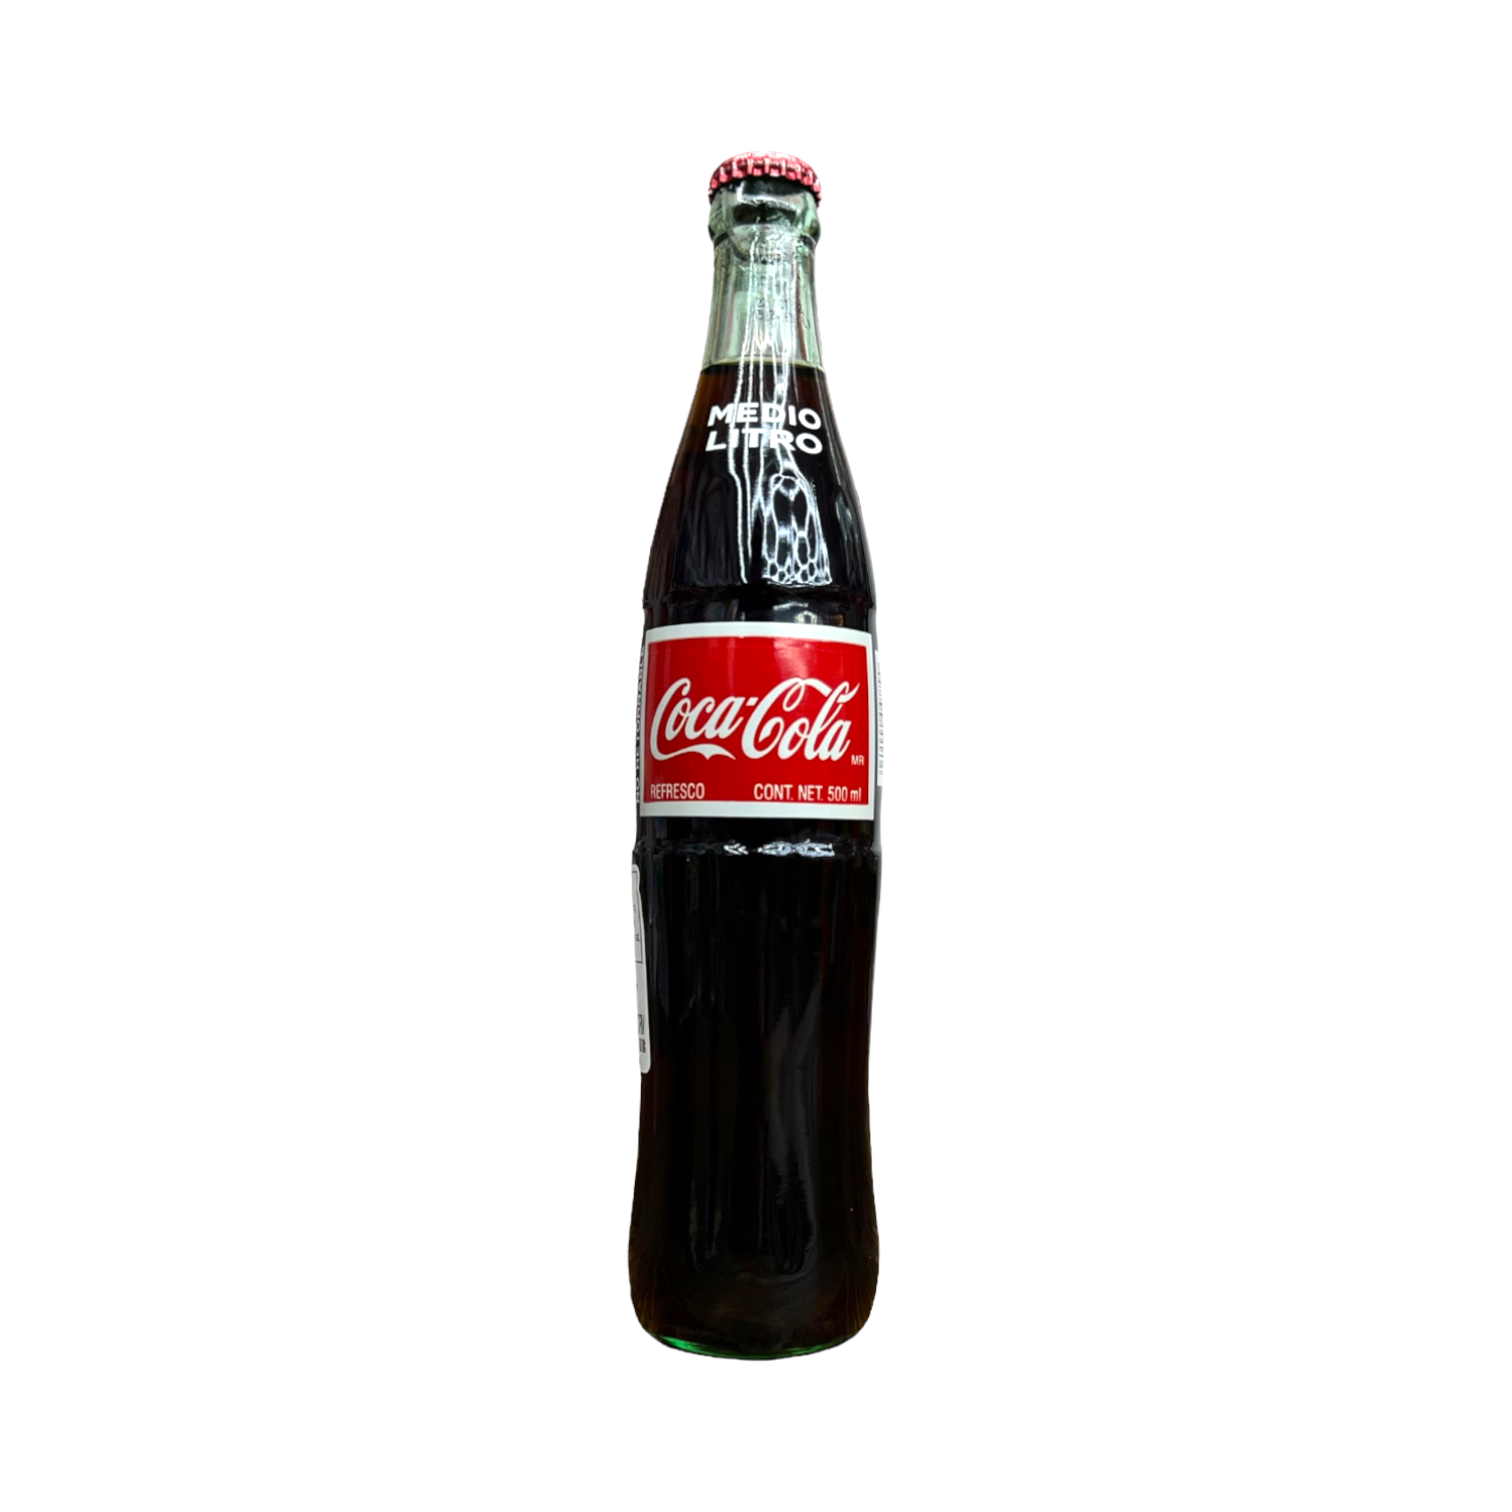 7 exciting facts about Coke